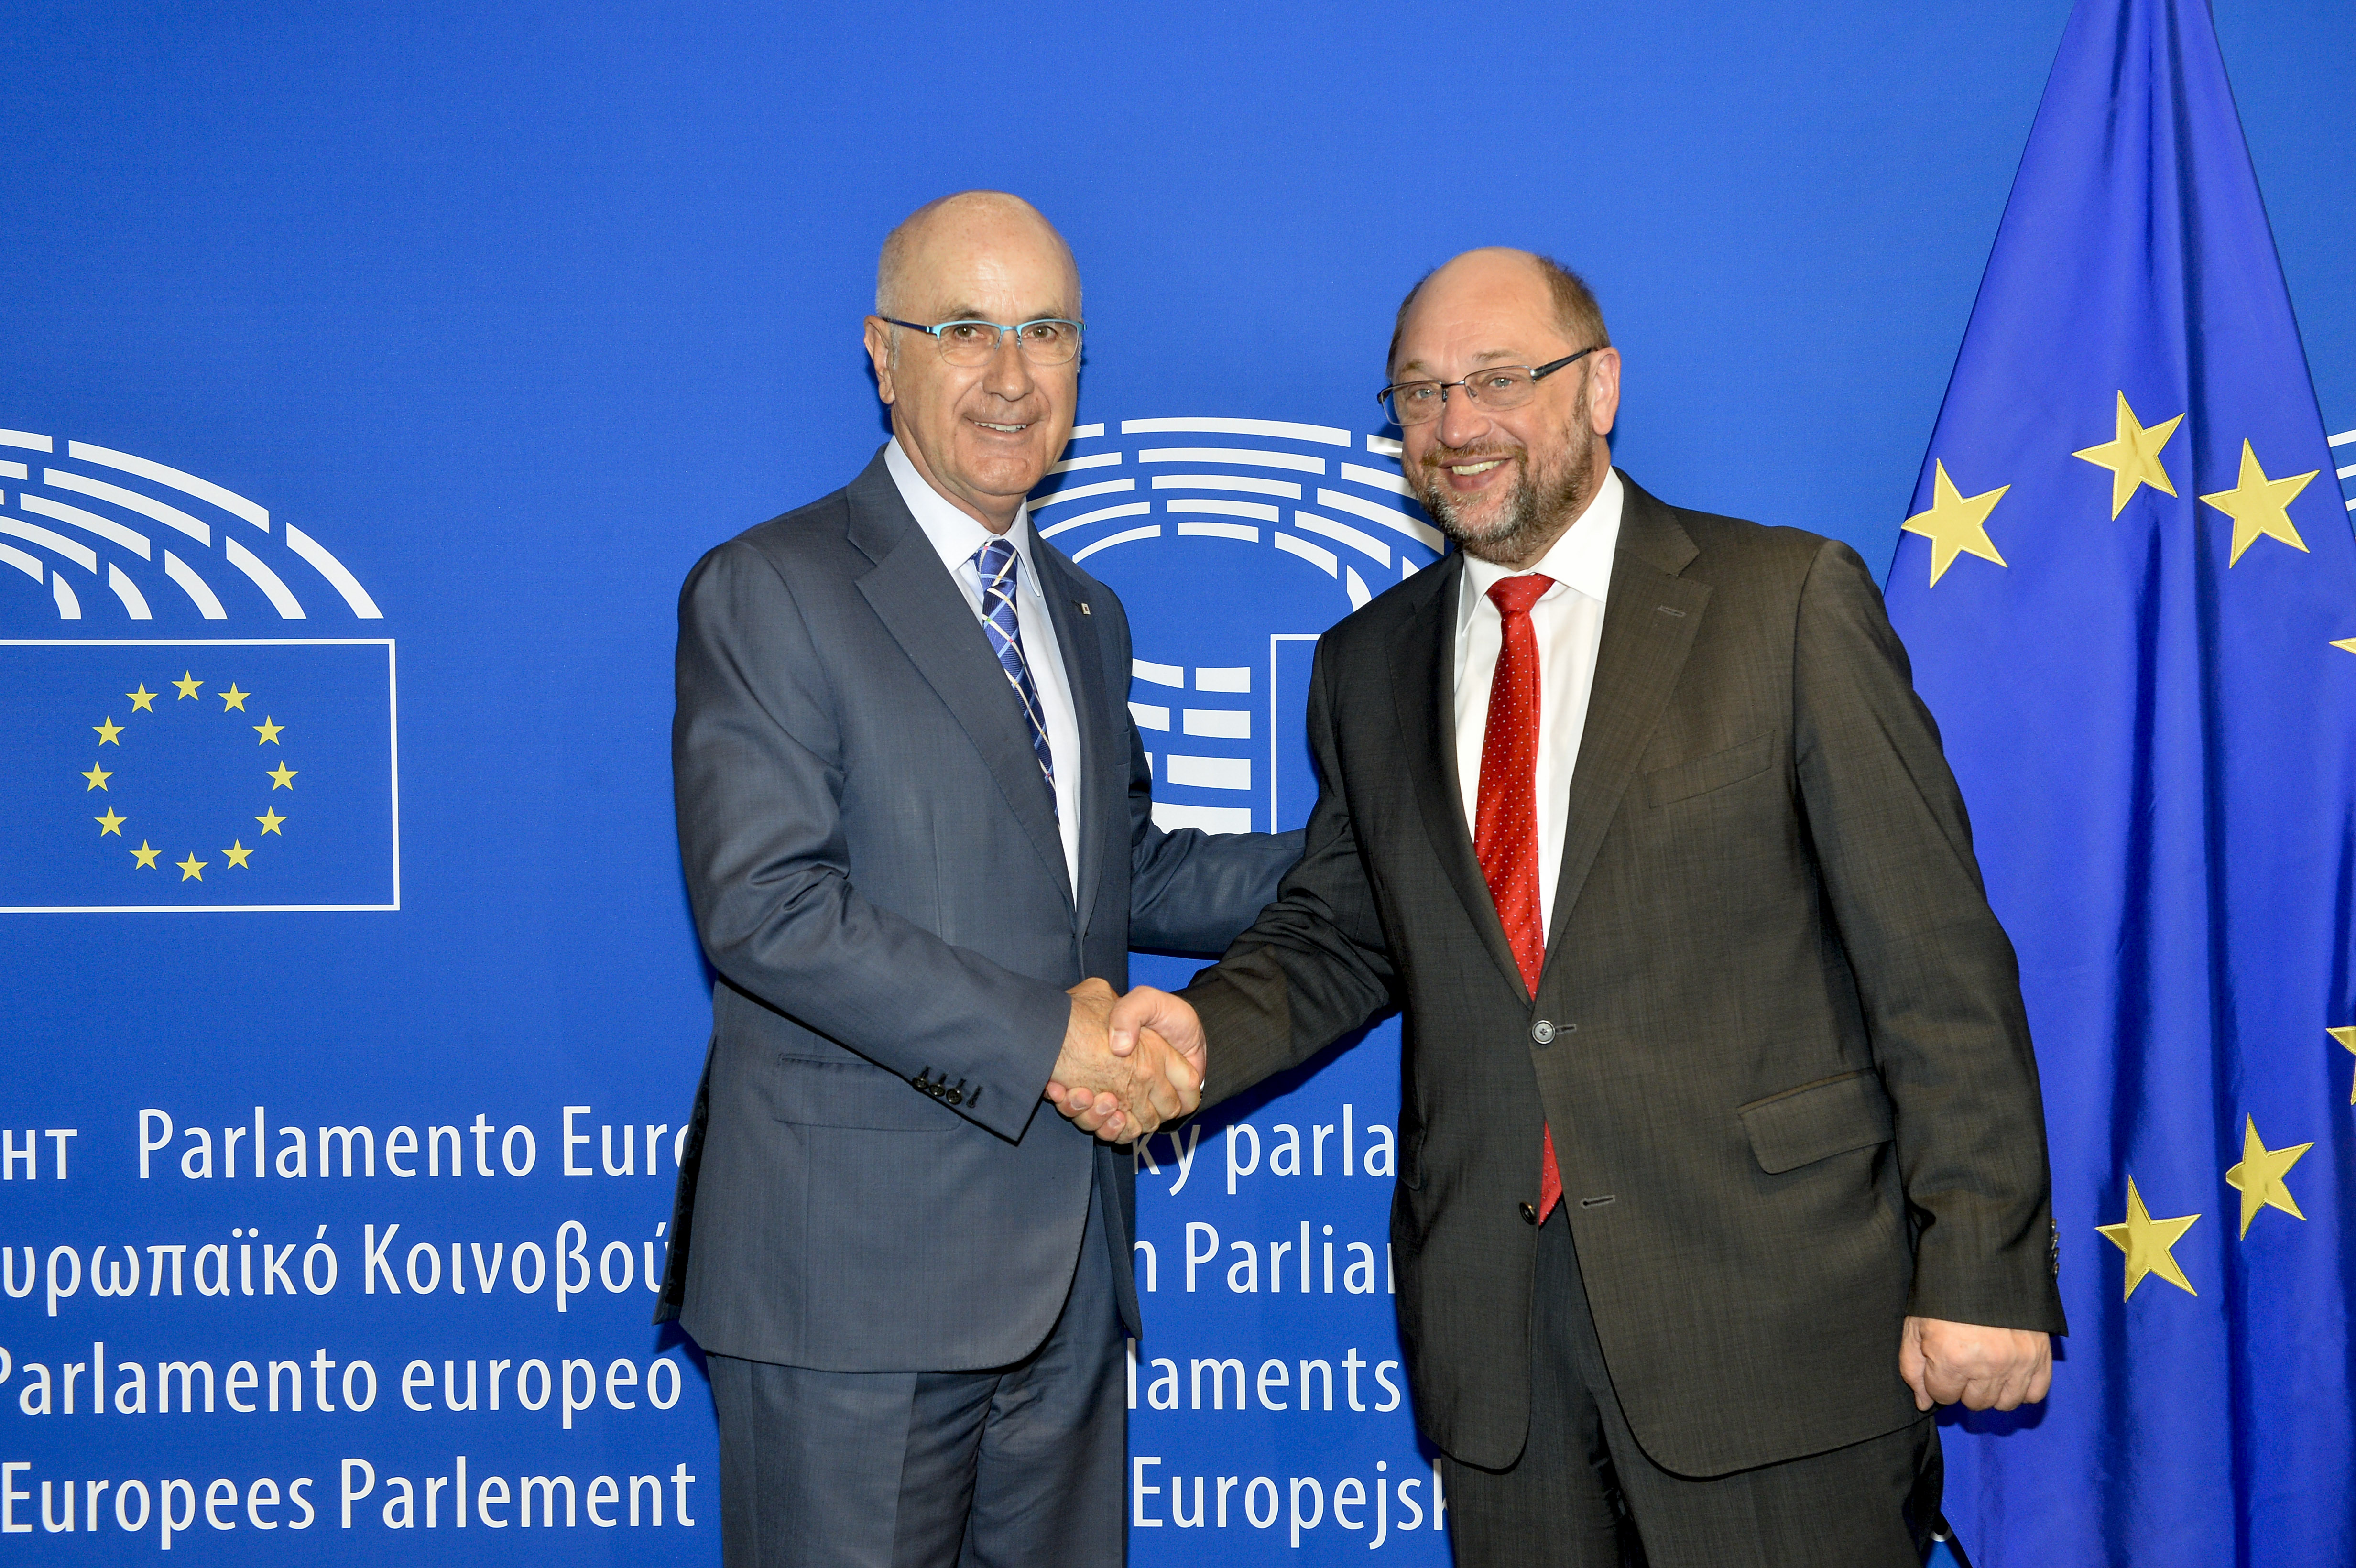 Josep Antoni Duran i Lleida with the President of the European Parliament, Martin Schulz (by EP)